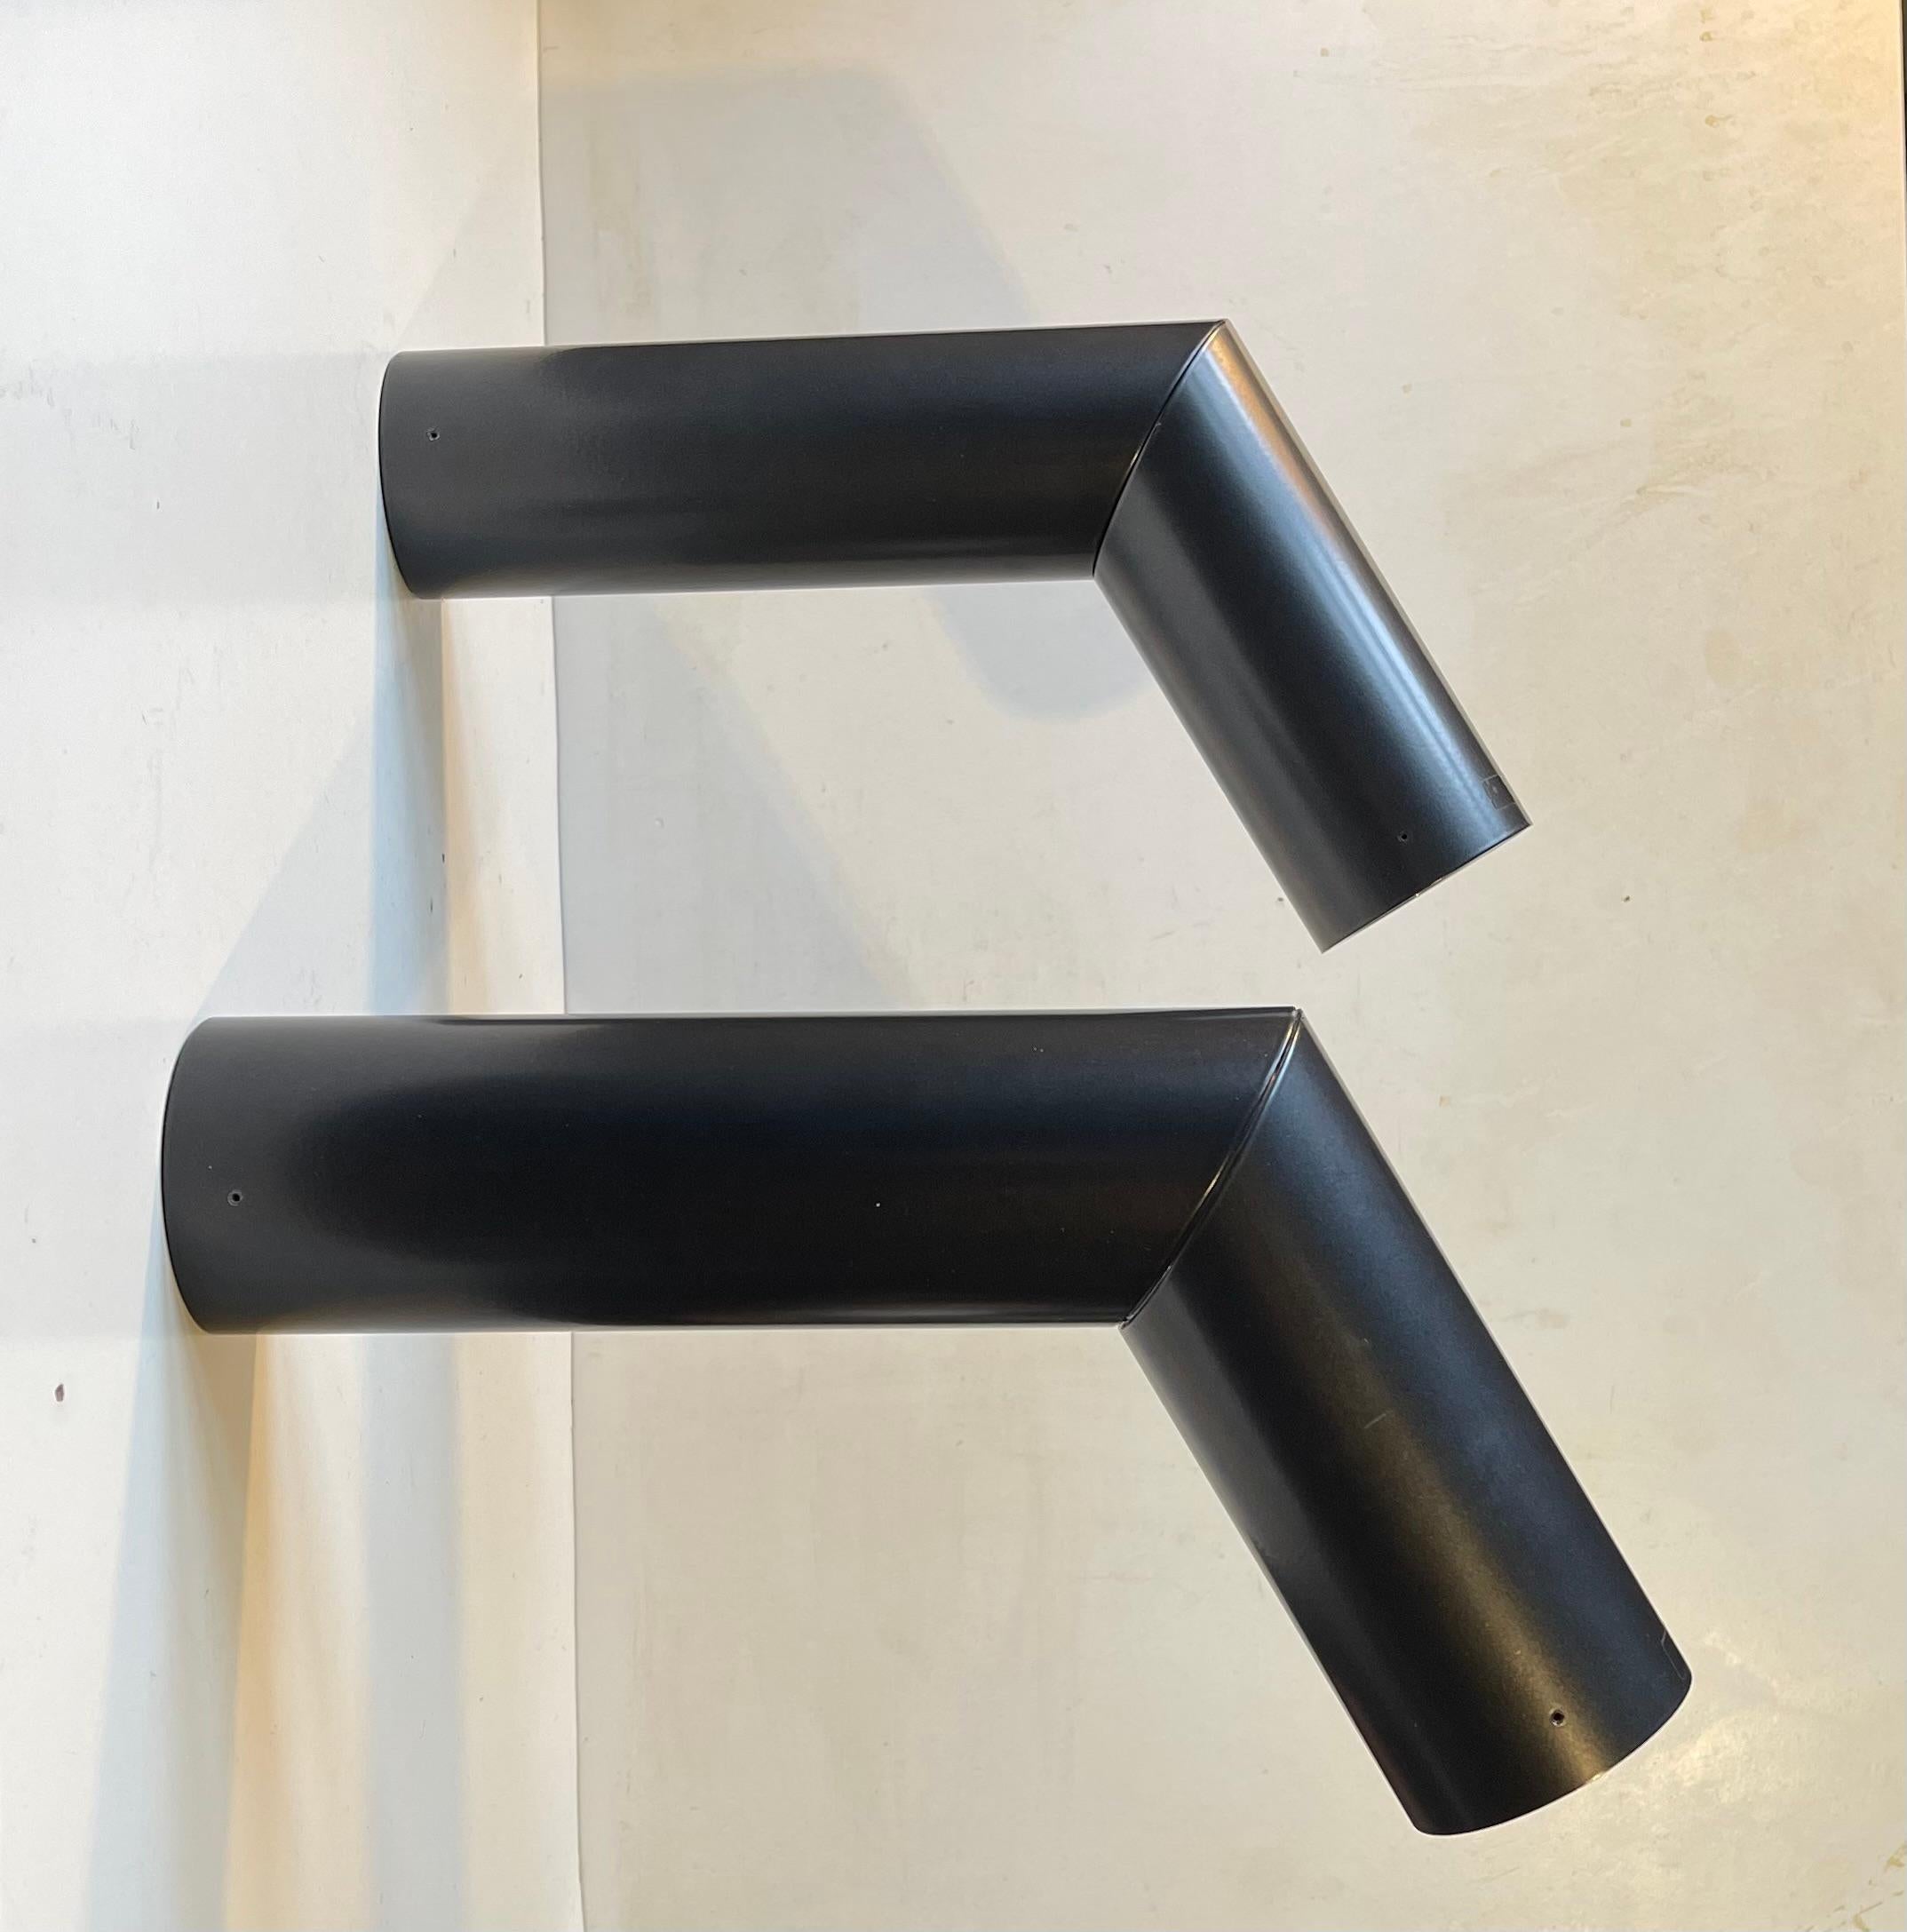 E06 is in a family of adjustable tubular luminaires with a cylindrical lamp body. Here a set in satin black. Designed by Habits Studio in 2008 and produced by the famous Luceplan brand. They feature a cylindrical body in extruded aluminum. It has